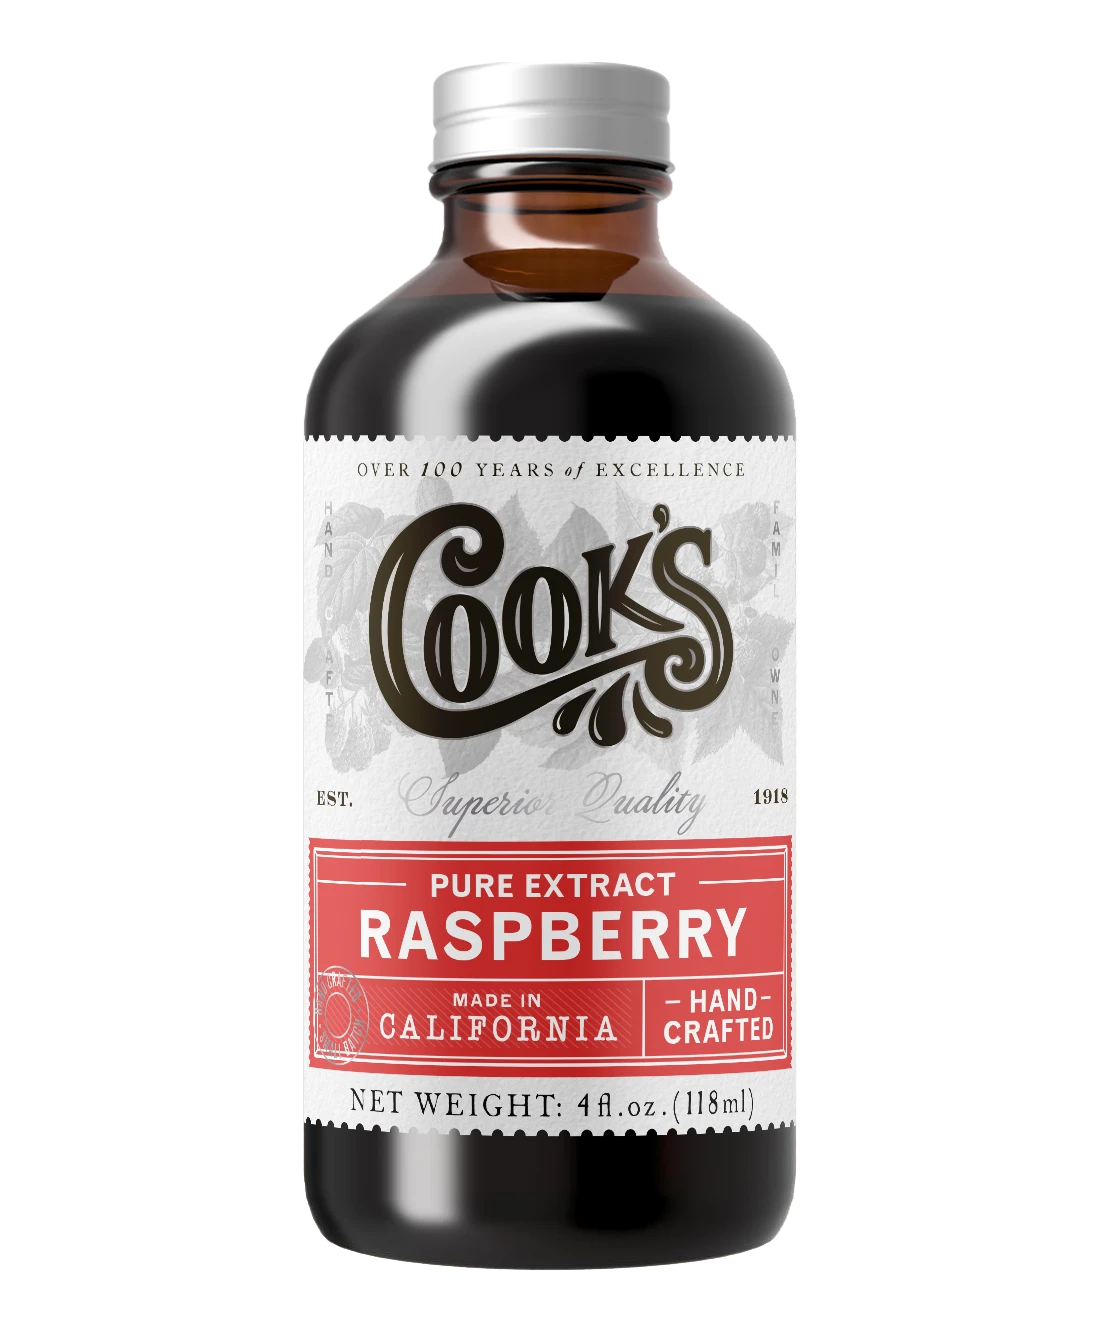 Pure Red Raspberry Extract